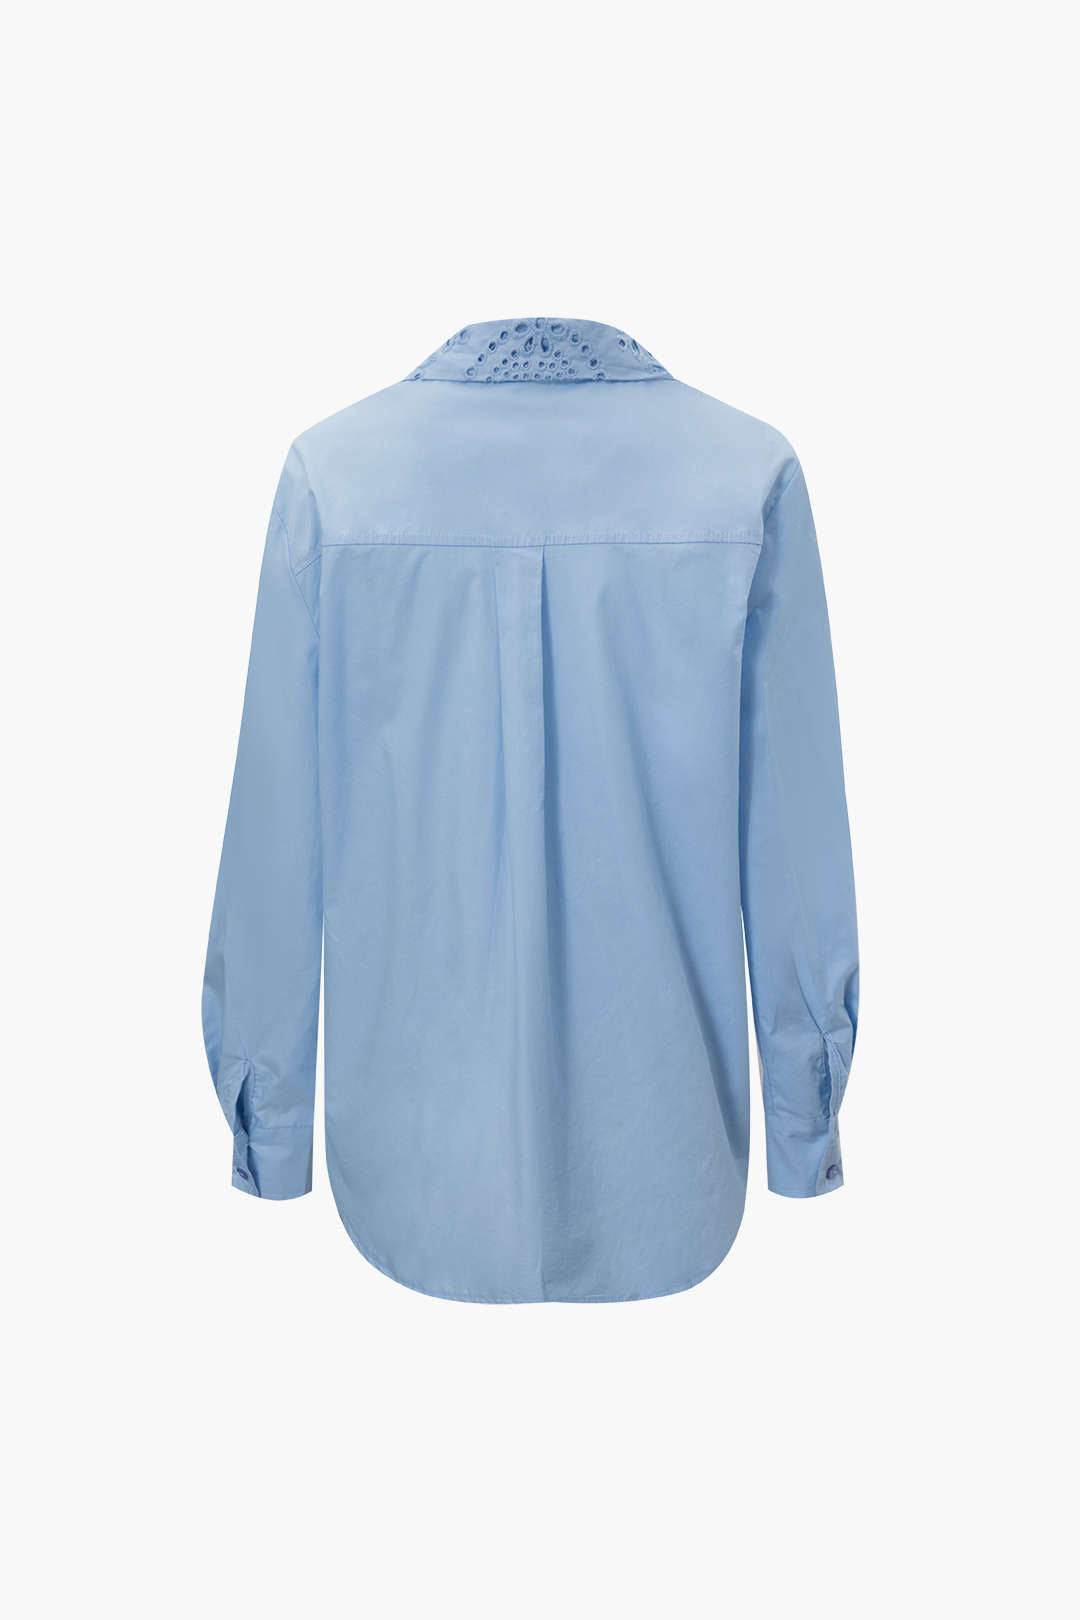 Eyelet Embroidery Button Up Long Sleeve Shirt